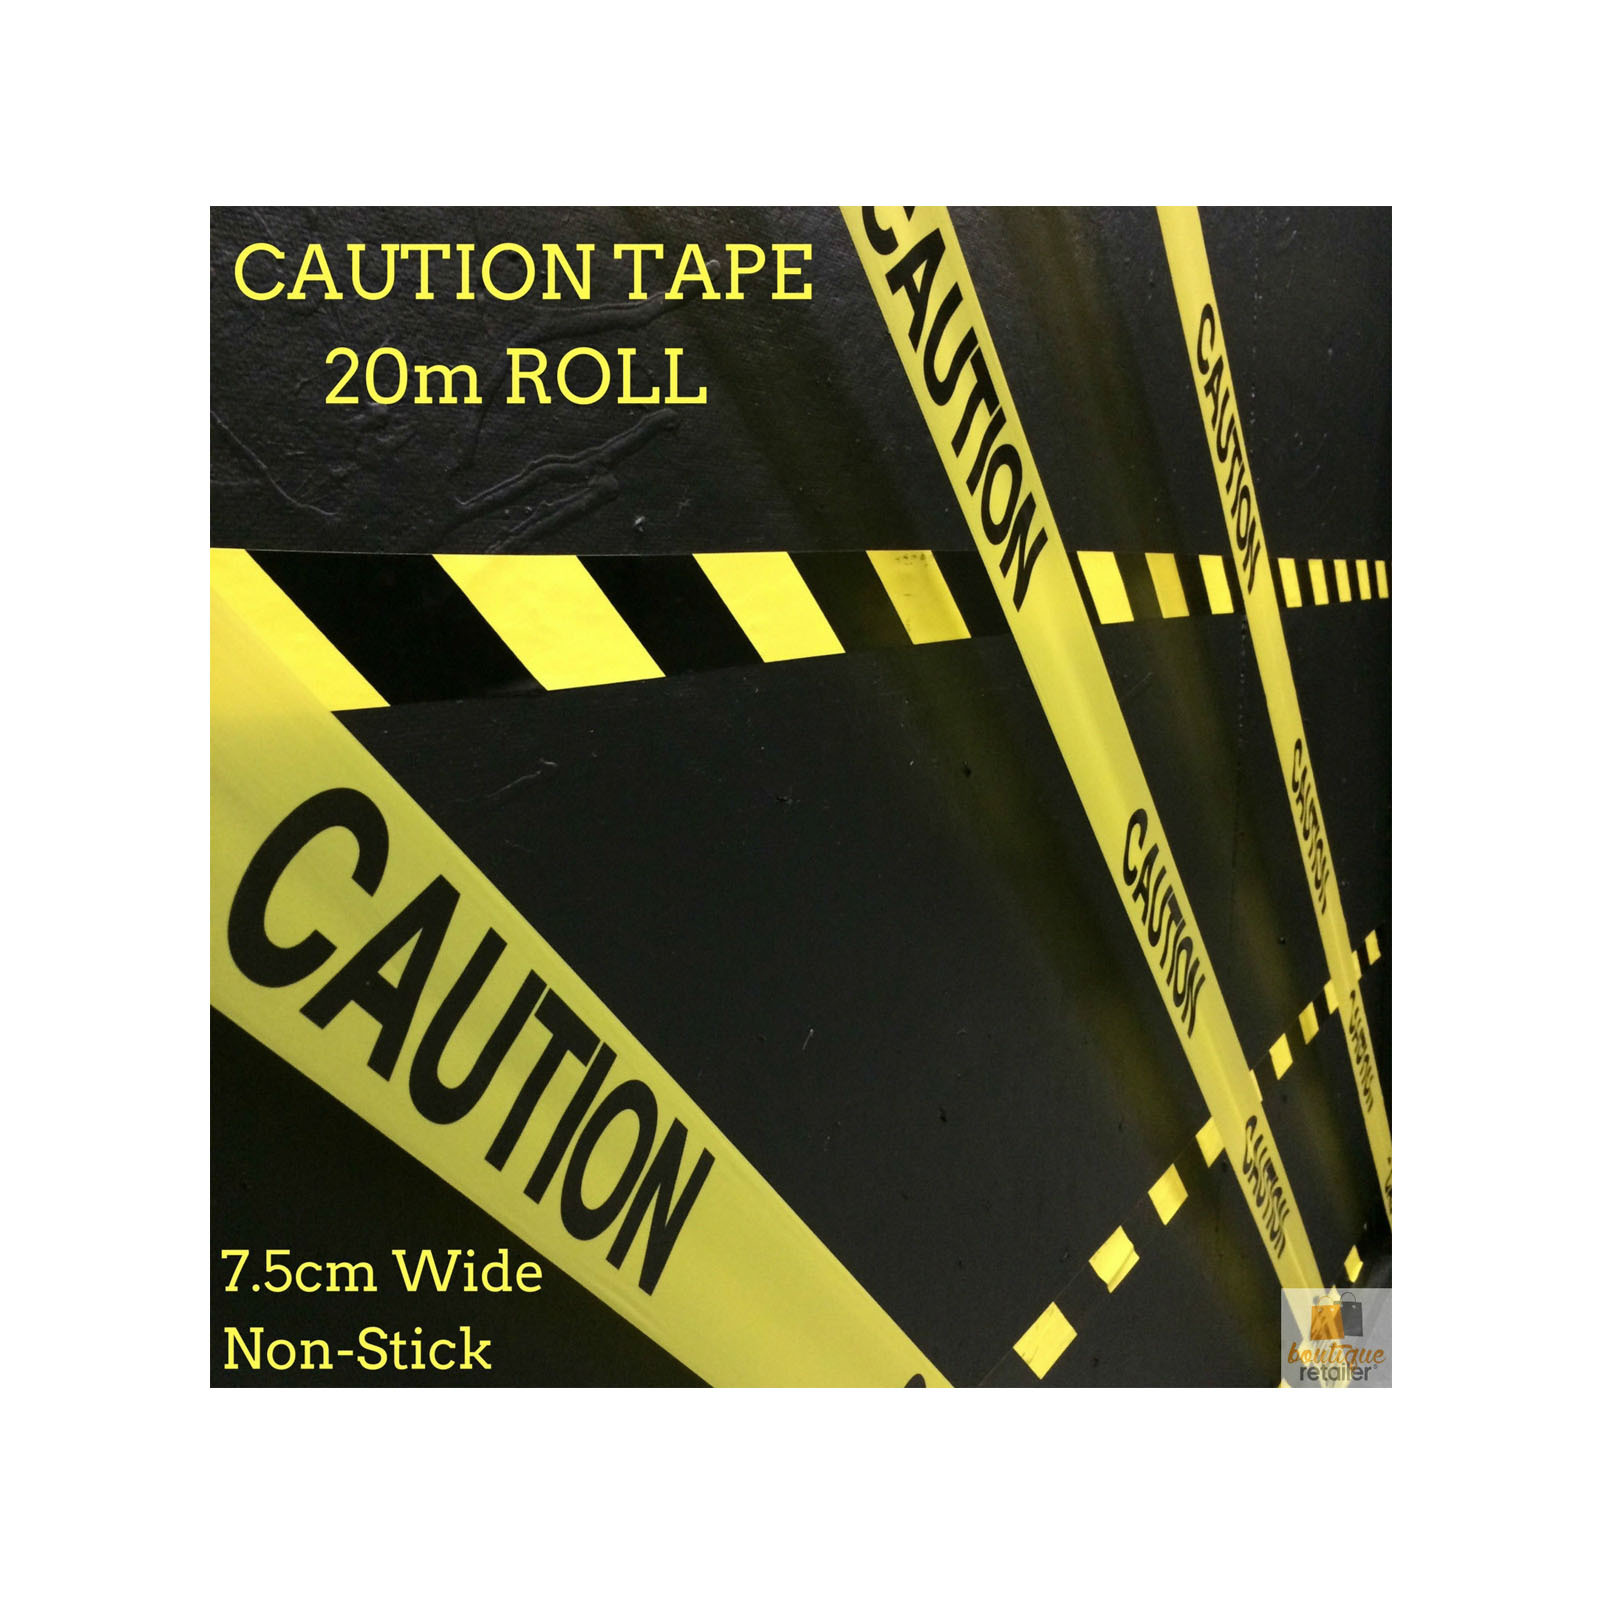 CAUTION TAPE Yellow Safety Warning Barricade Industrial Strip Non-Stick 20m